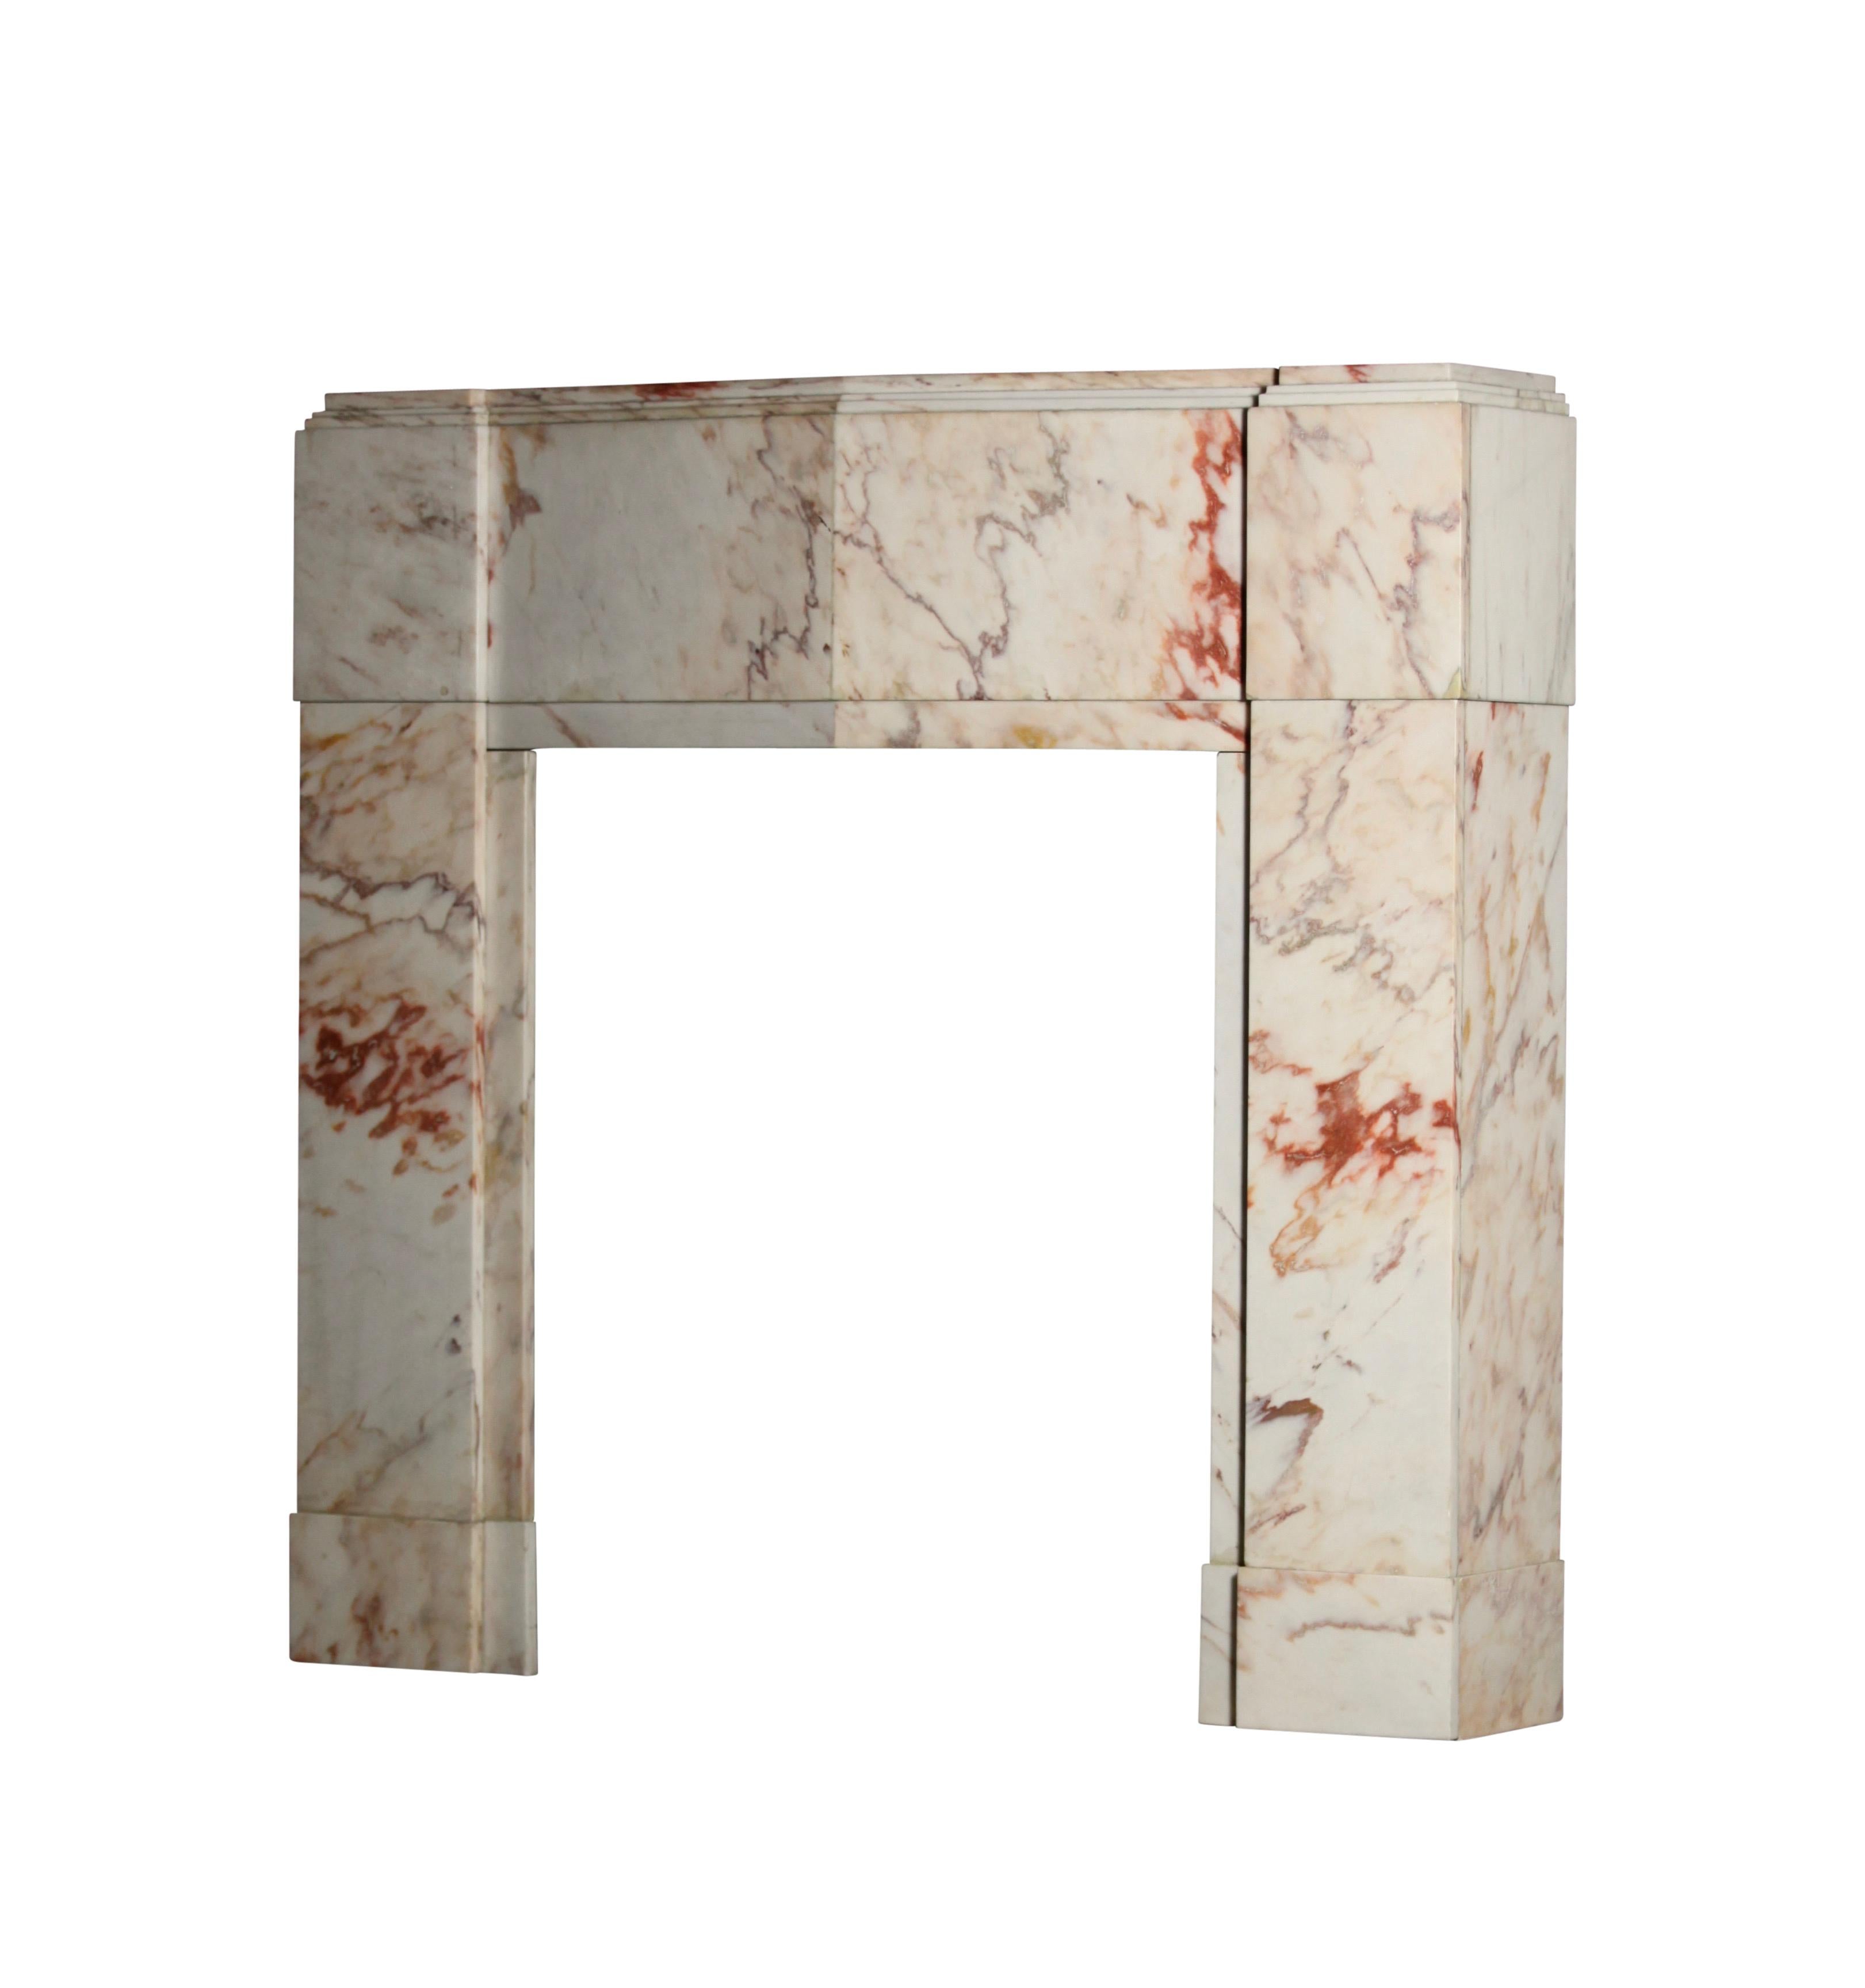 This fireplace surround is a perfect example of perfection and craftsmanship. The designer has respected the veining of the marble while still incorporating an Art Deco design. This mantel is completely original and not broken.
Original from an Art